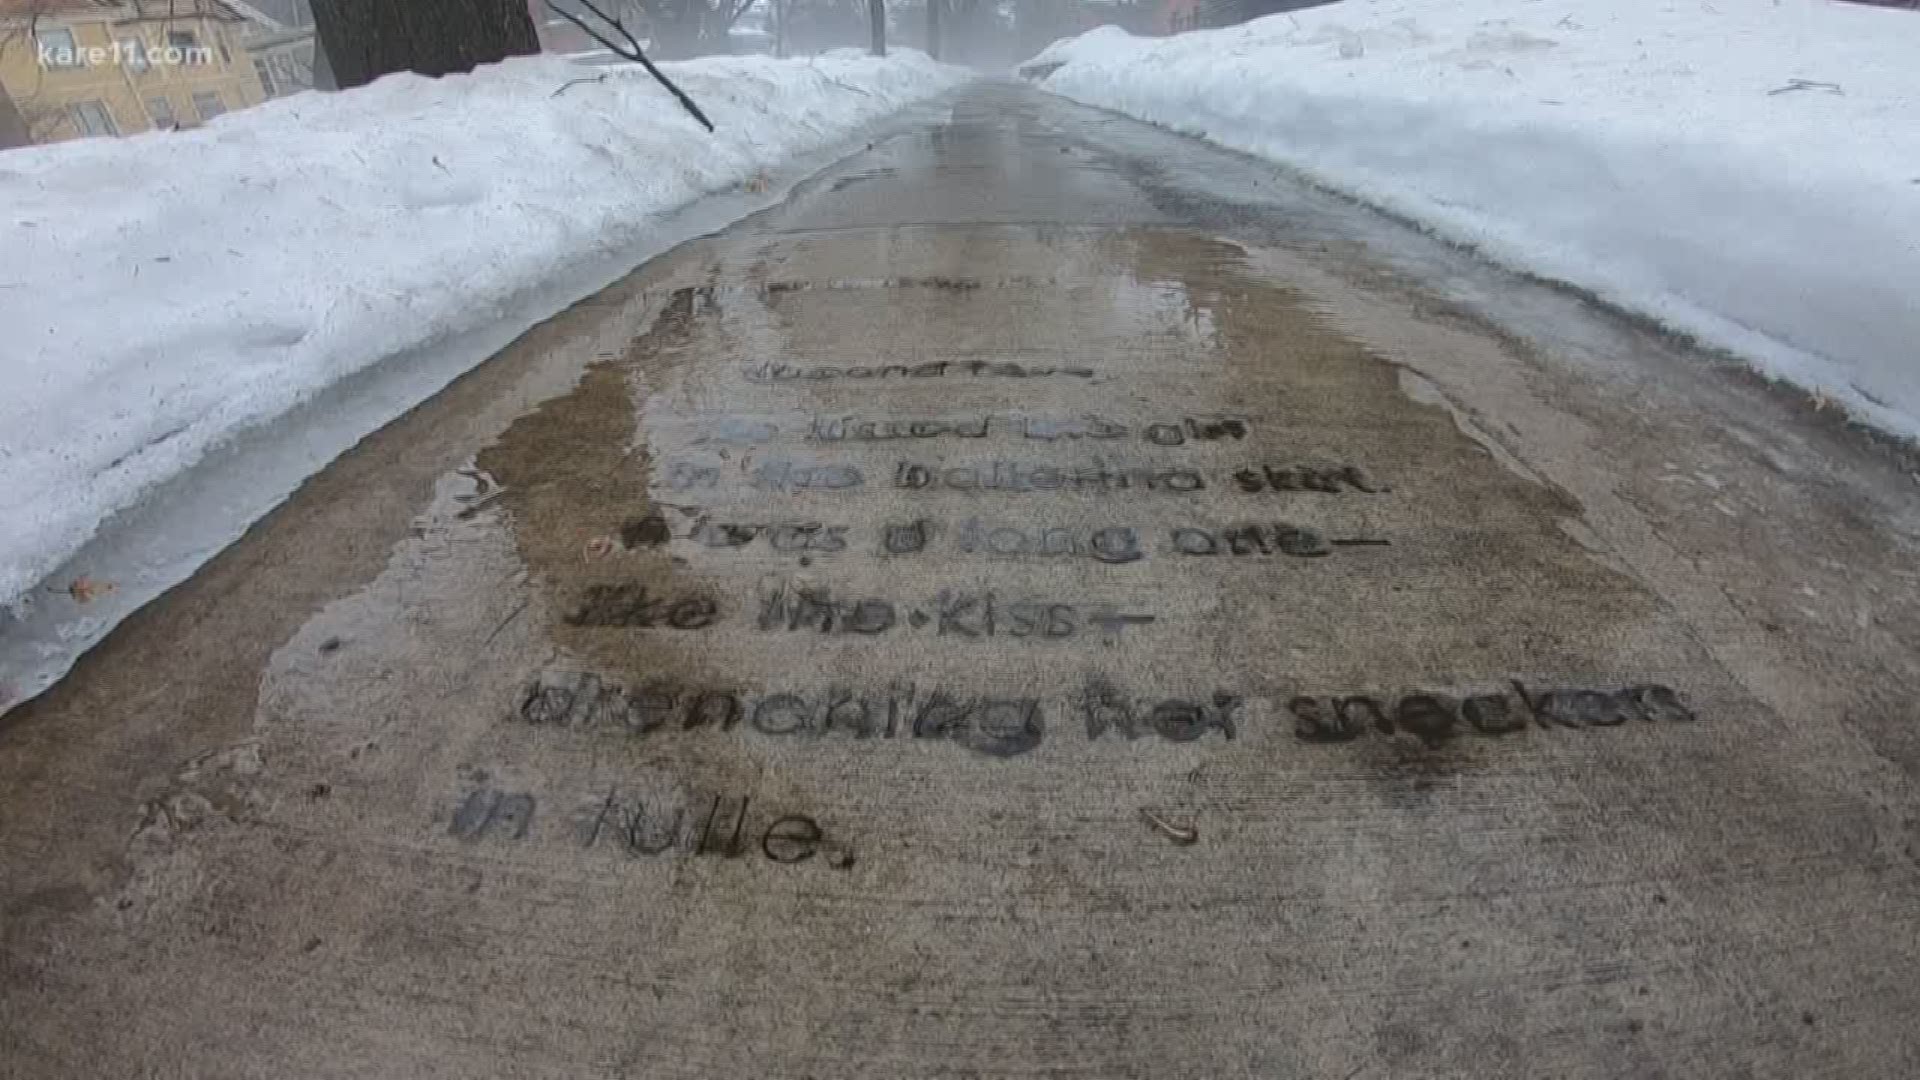 Saint Paul is working to spruce up its sidewalks for spring. That includes stamping poems into the pavement across the city.